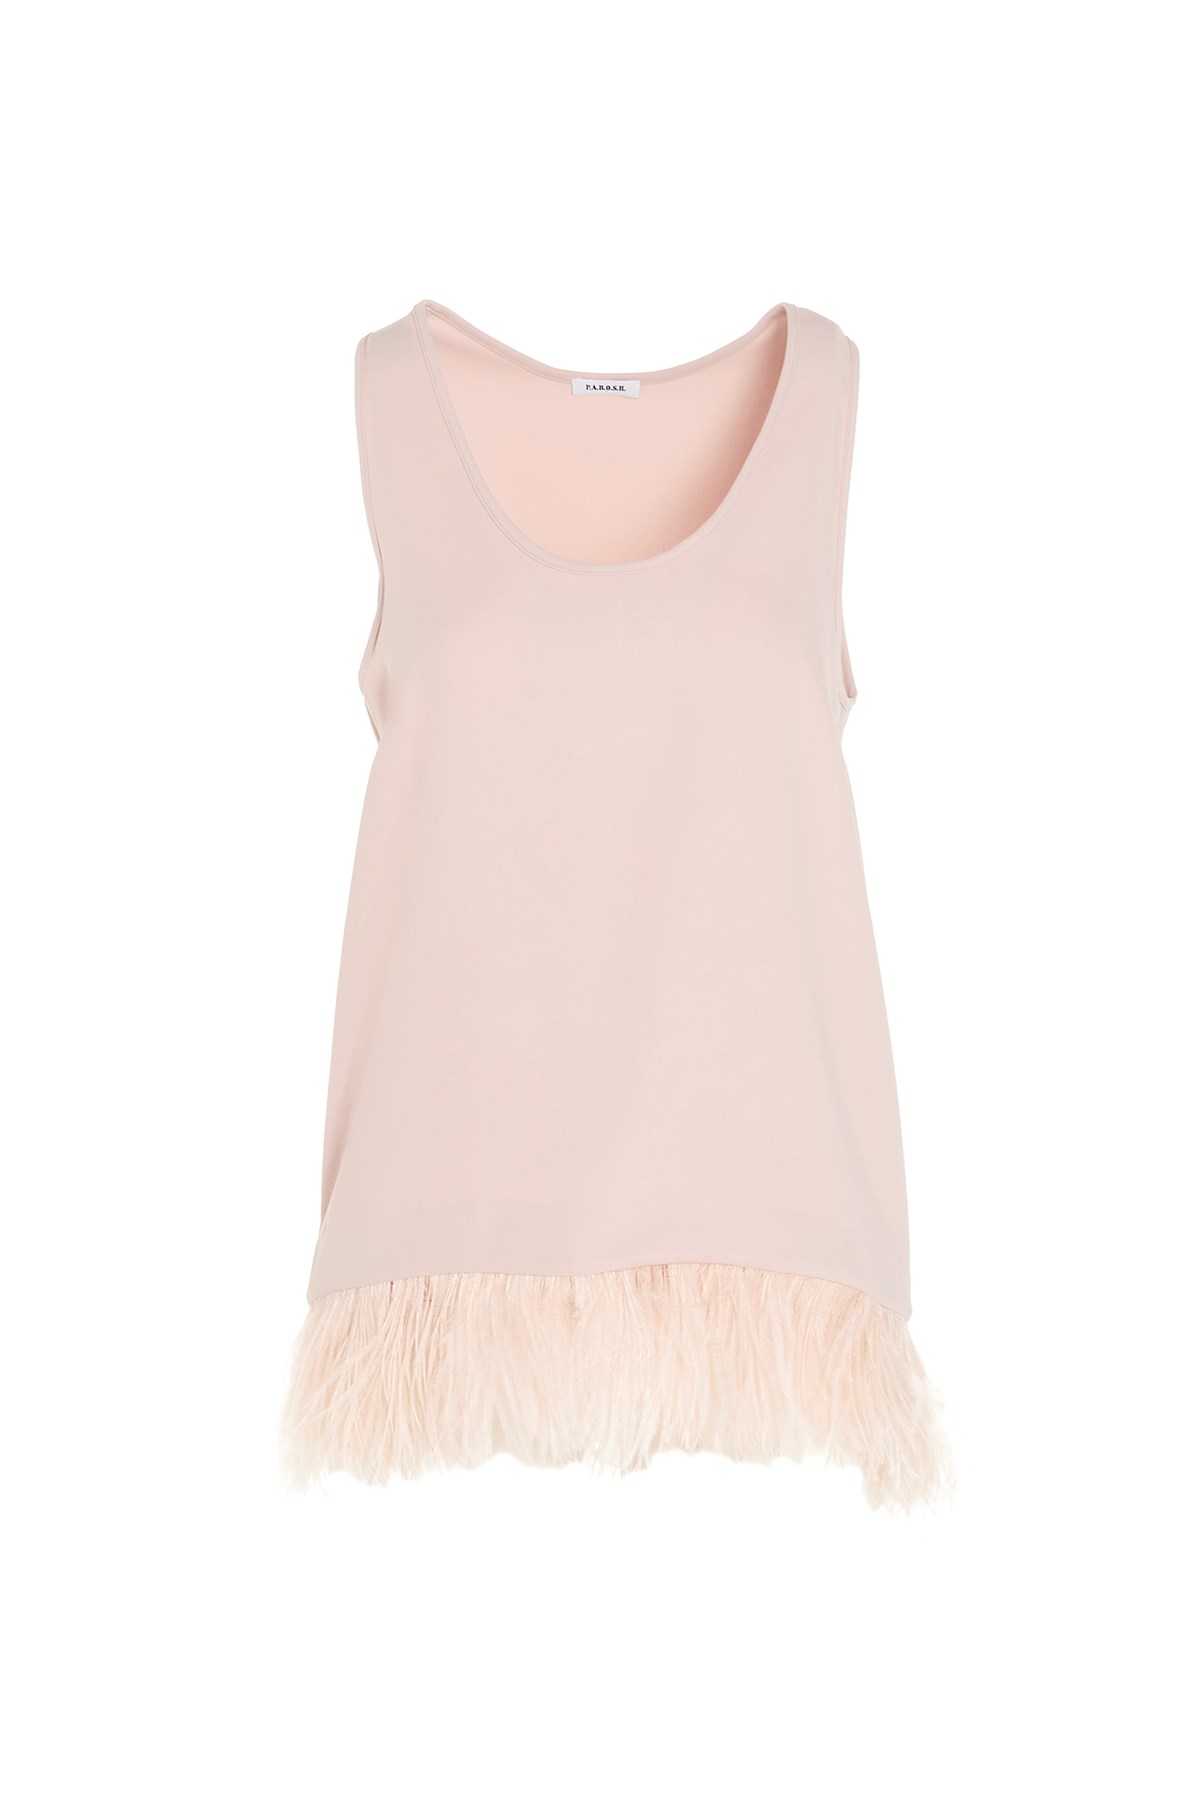 P.A.R.O.S.H. Ostrich Feathers Top